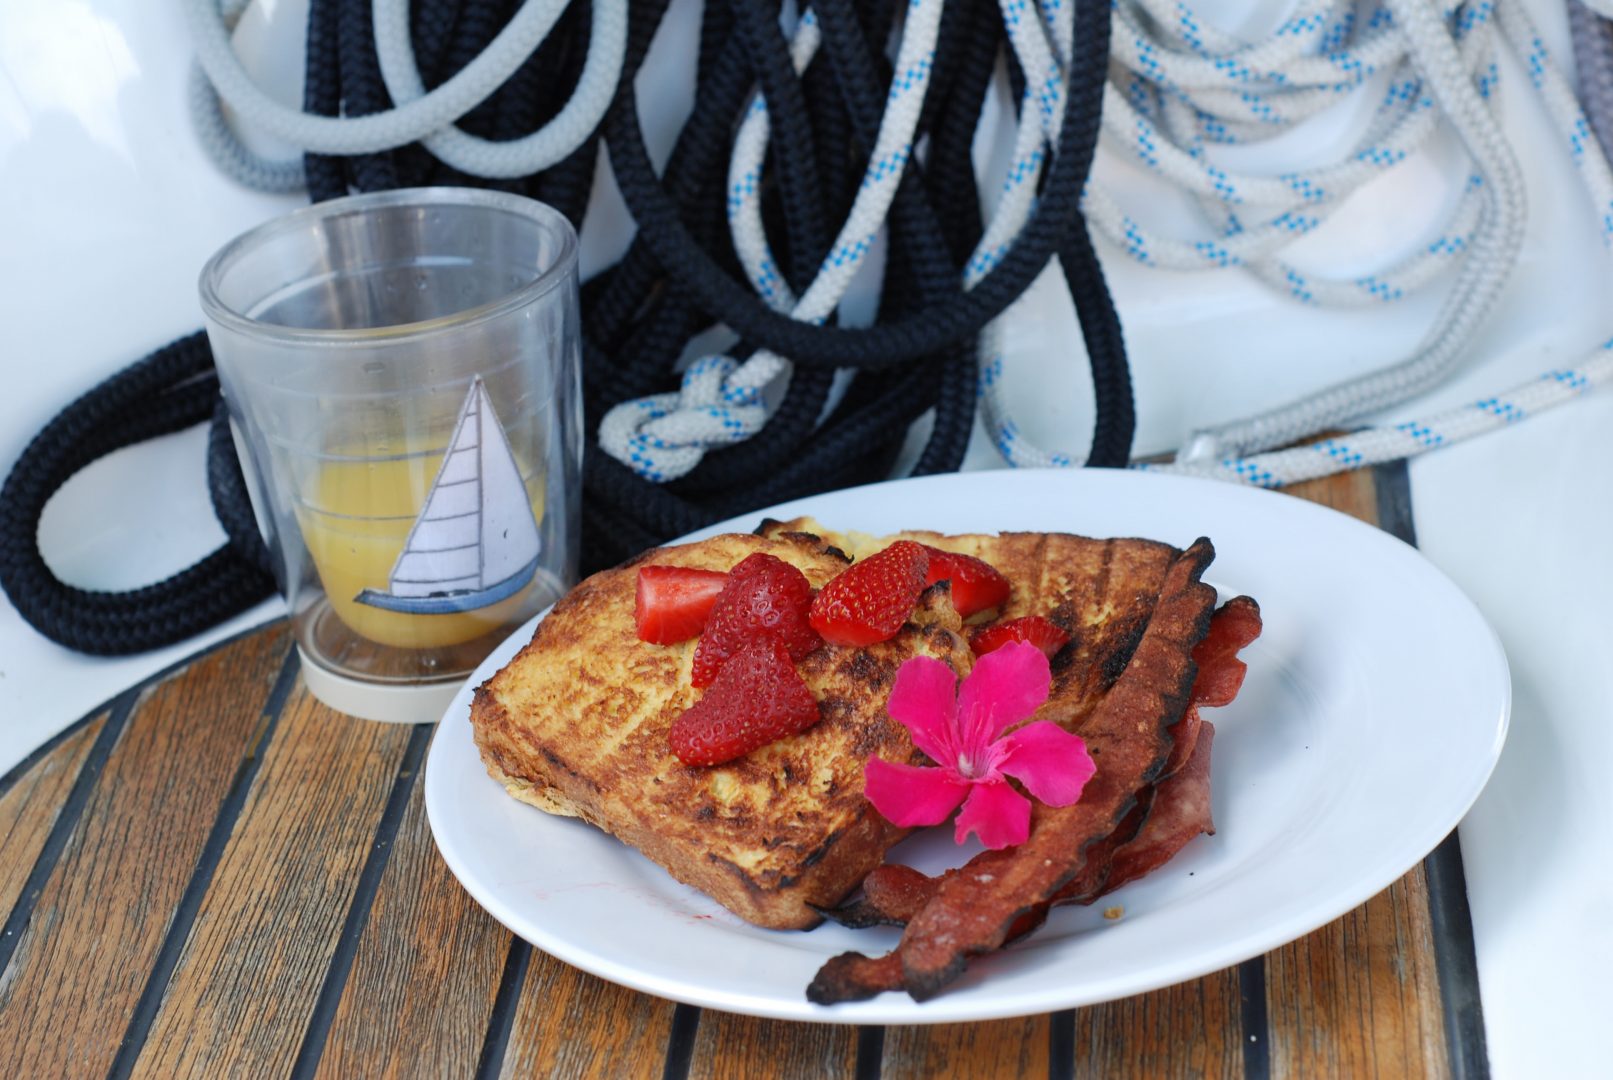 Host an Outdoor Mother's Day Brunch with Grilled Coconut Rum French Toast and Grilled Cocktails